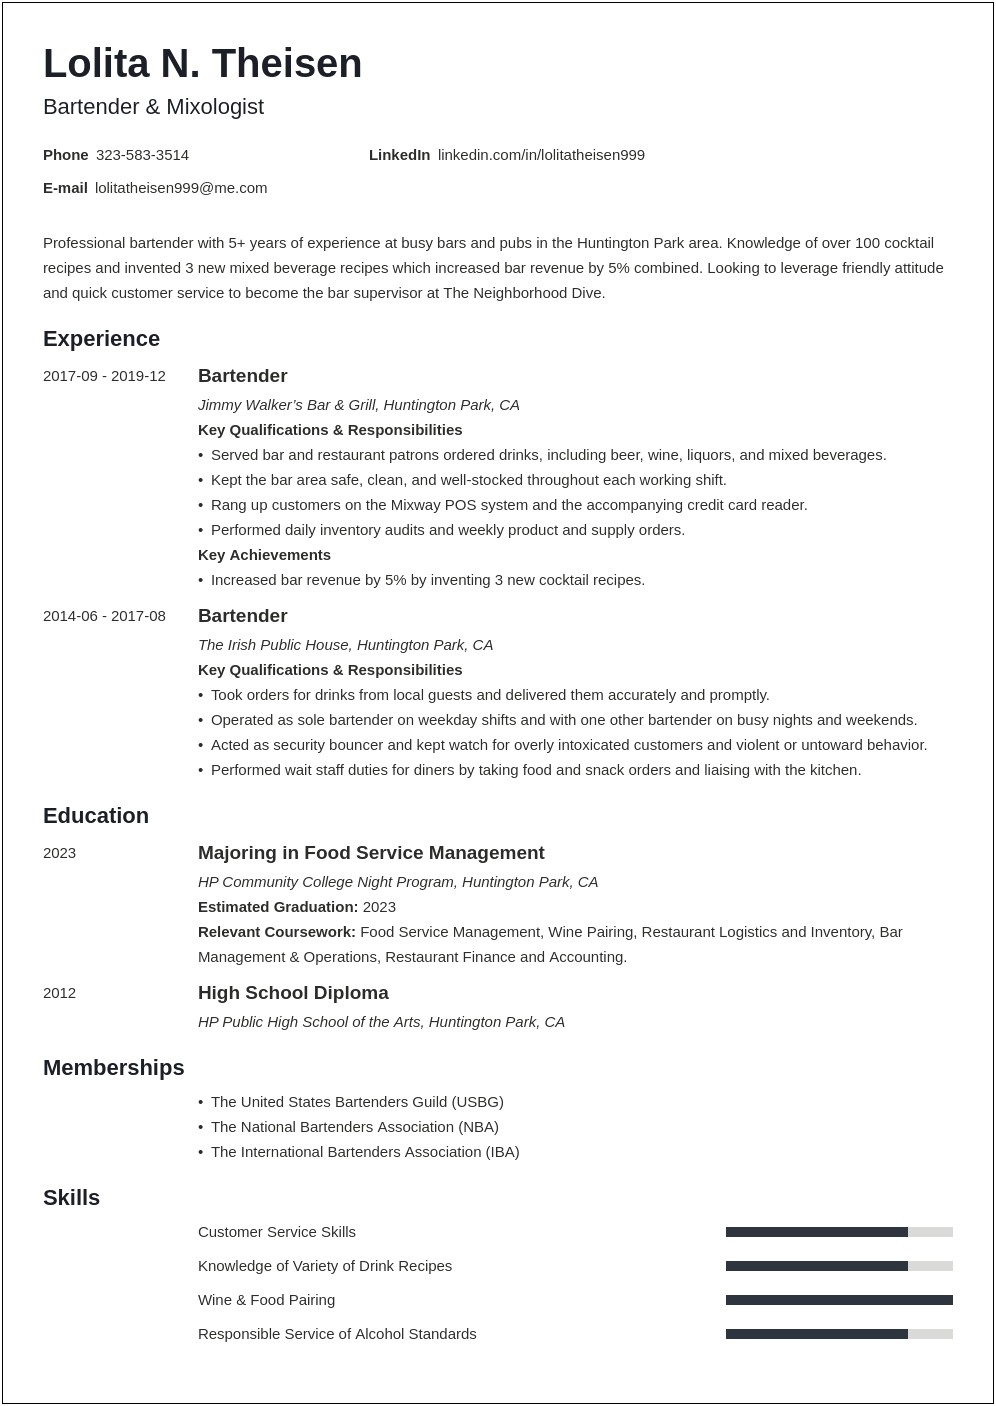 Bartender Skills And Abilities For Resume